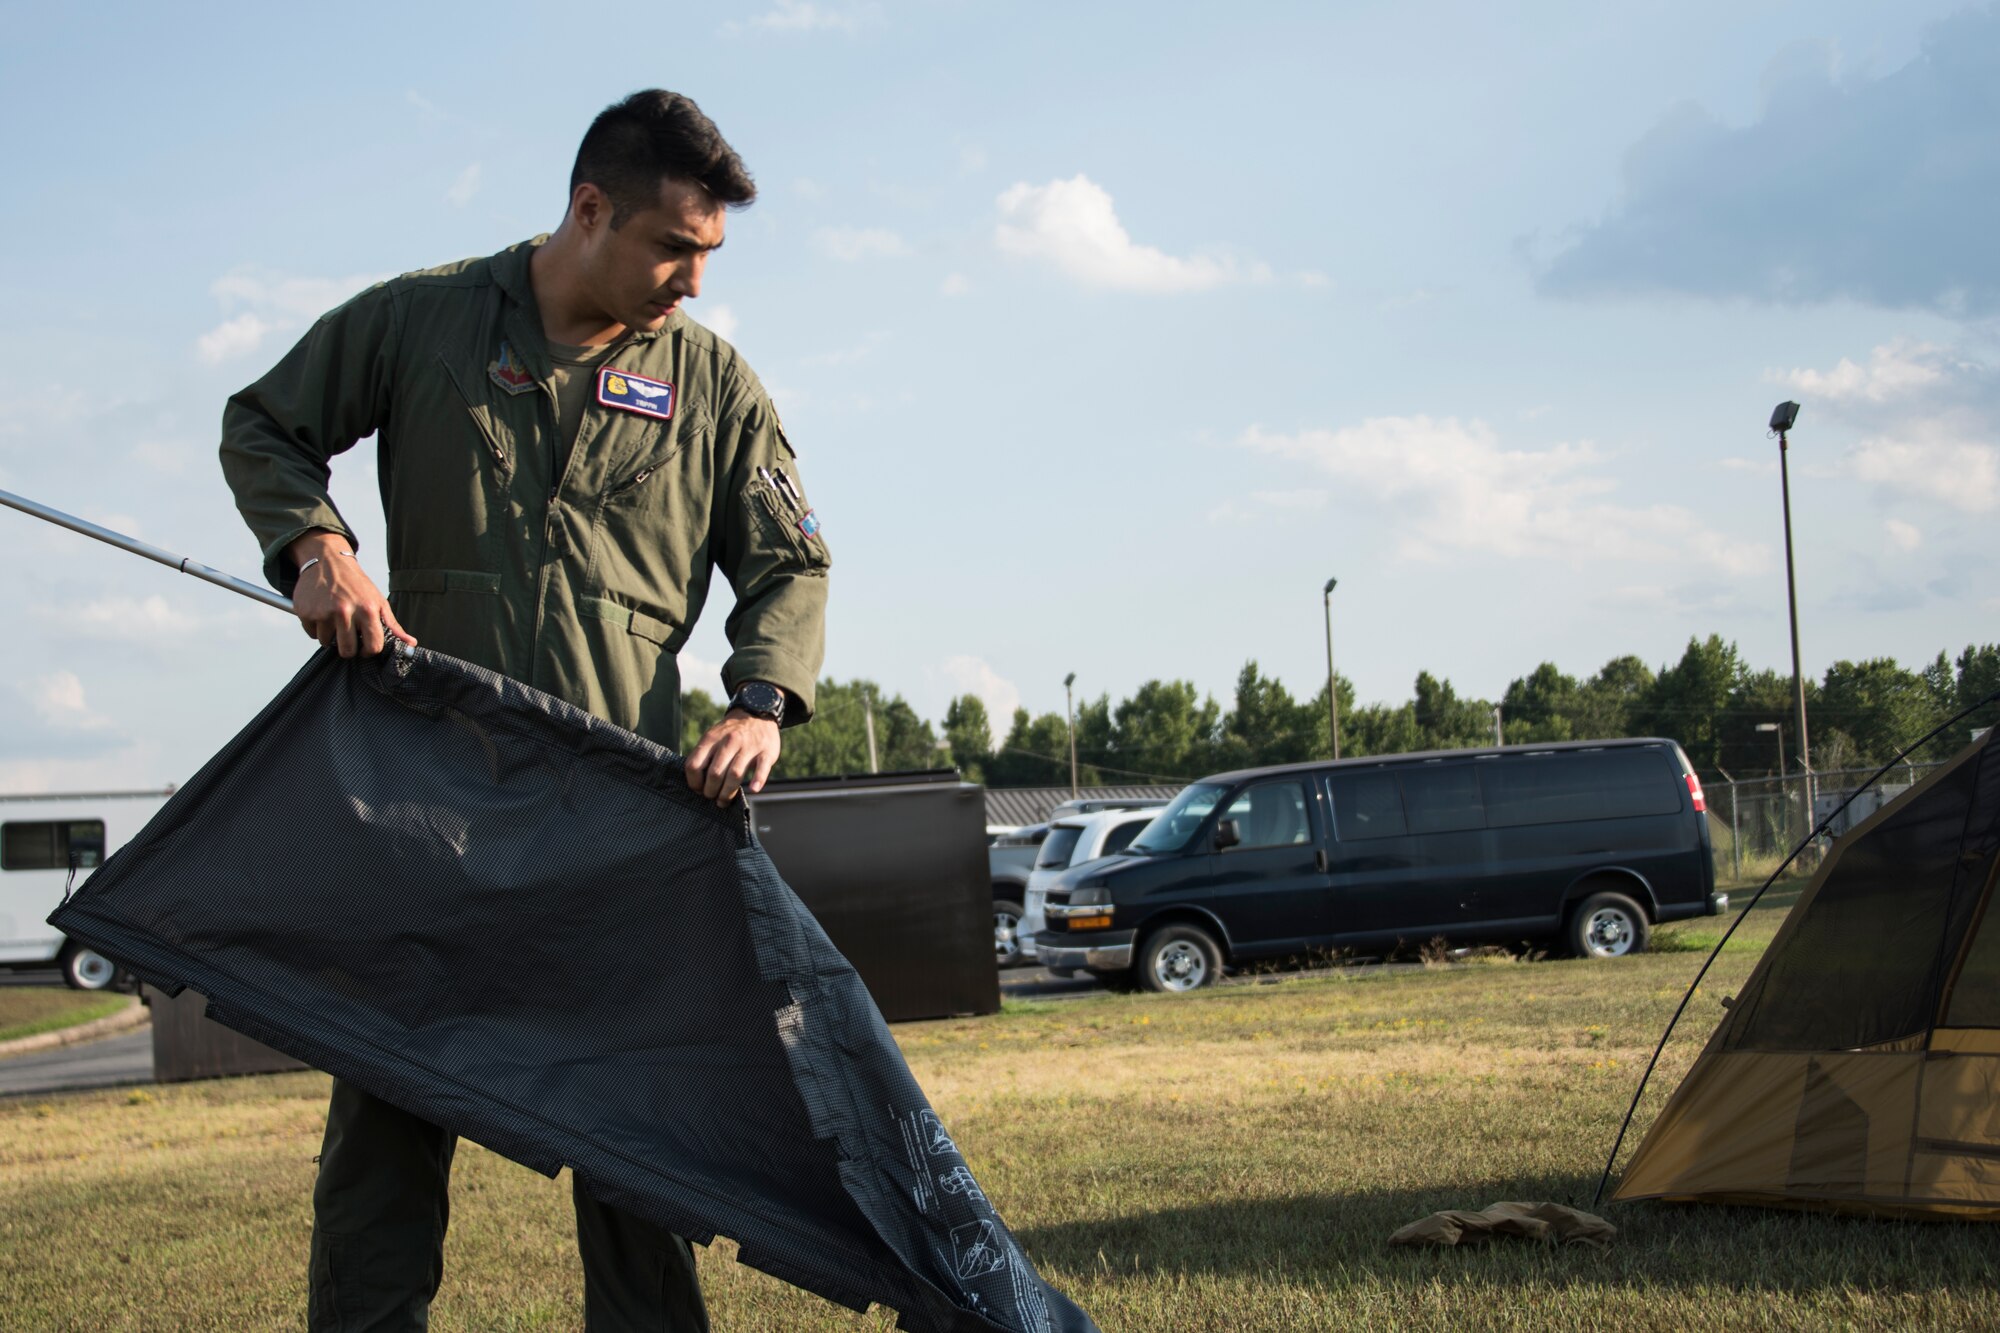 A photo of Airmen setting up equipment